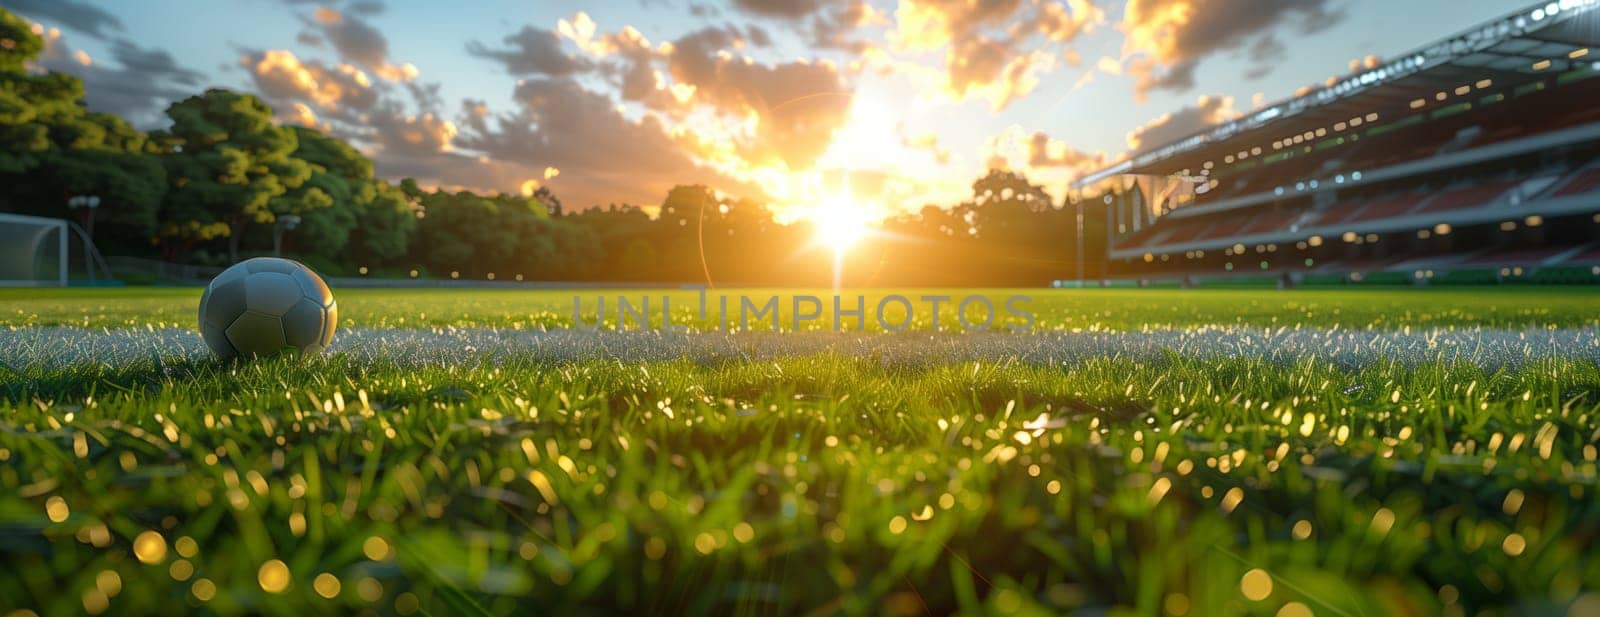 The sun sets over the natural landscape of a soccer field, with a soccer ball in the foreground, under a sky filled with clouds and a horizon of grass and terrestrial plants